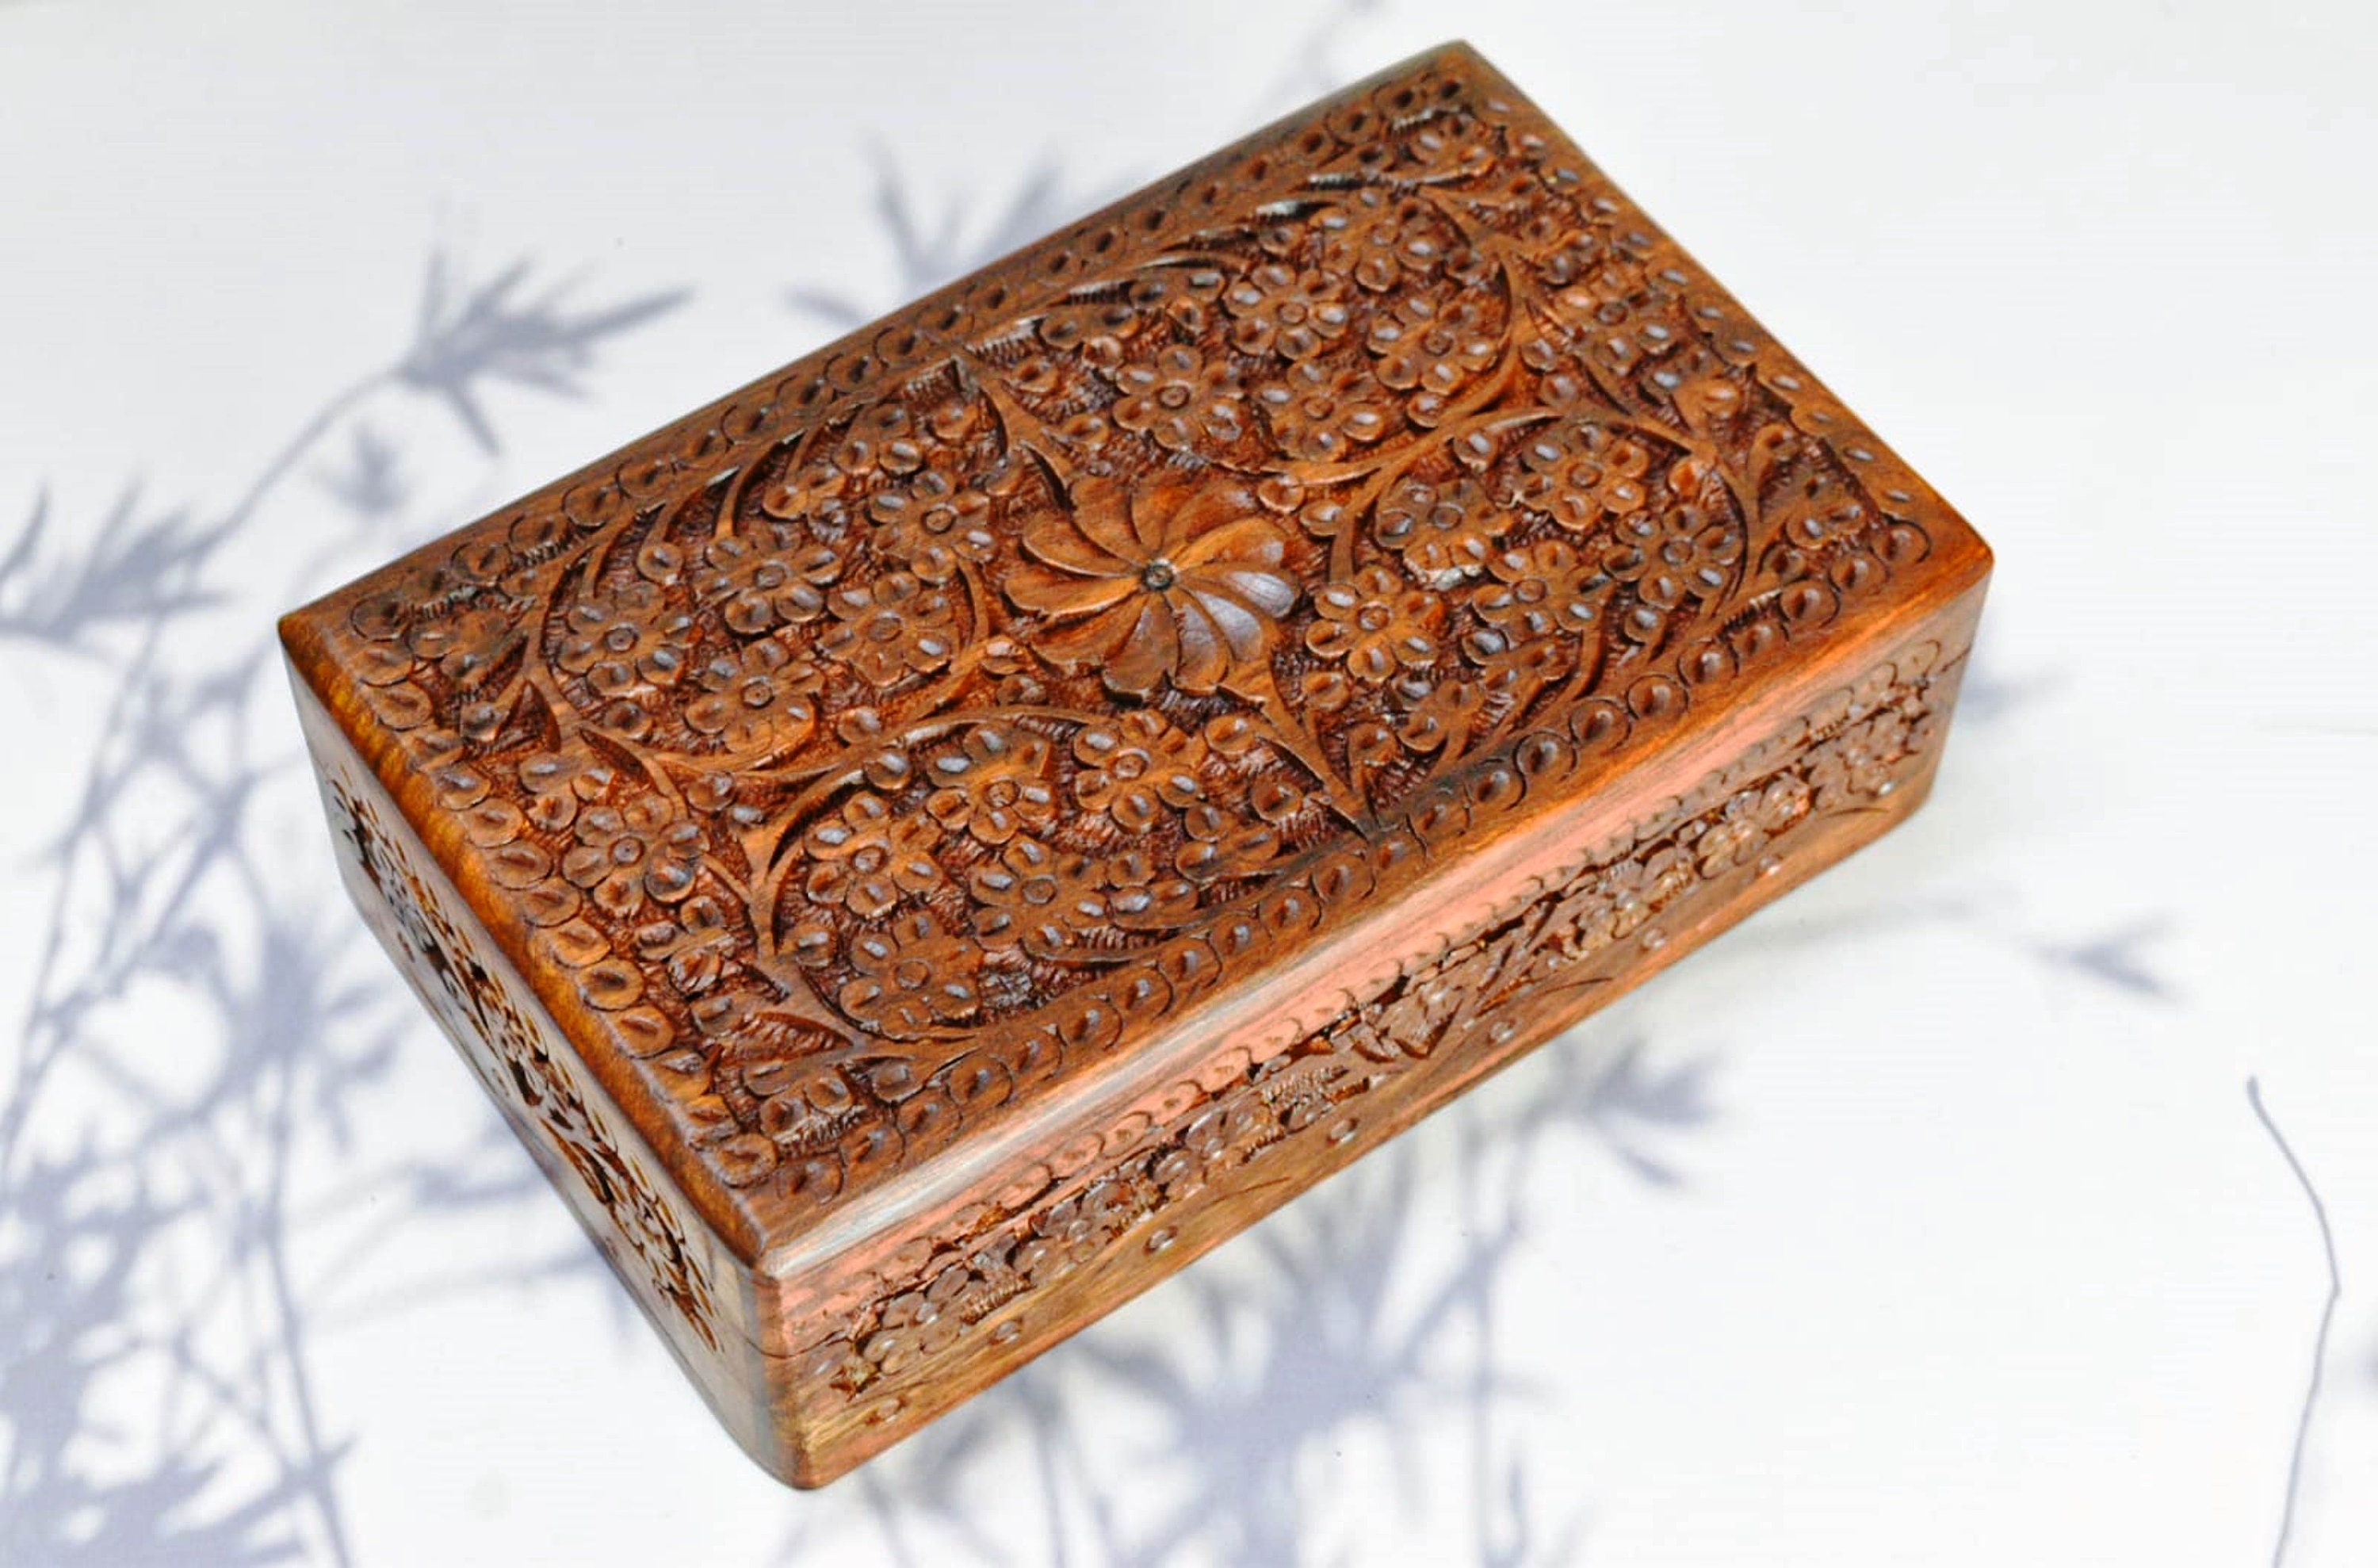 Wooden boxes - Simply great decorative & utility objects